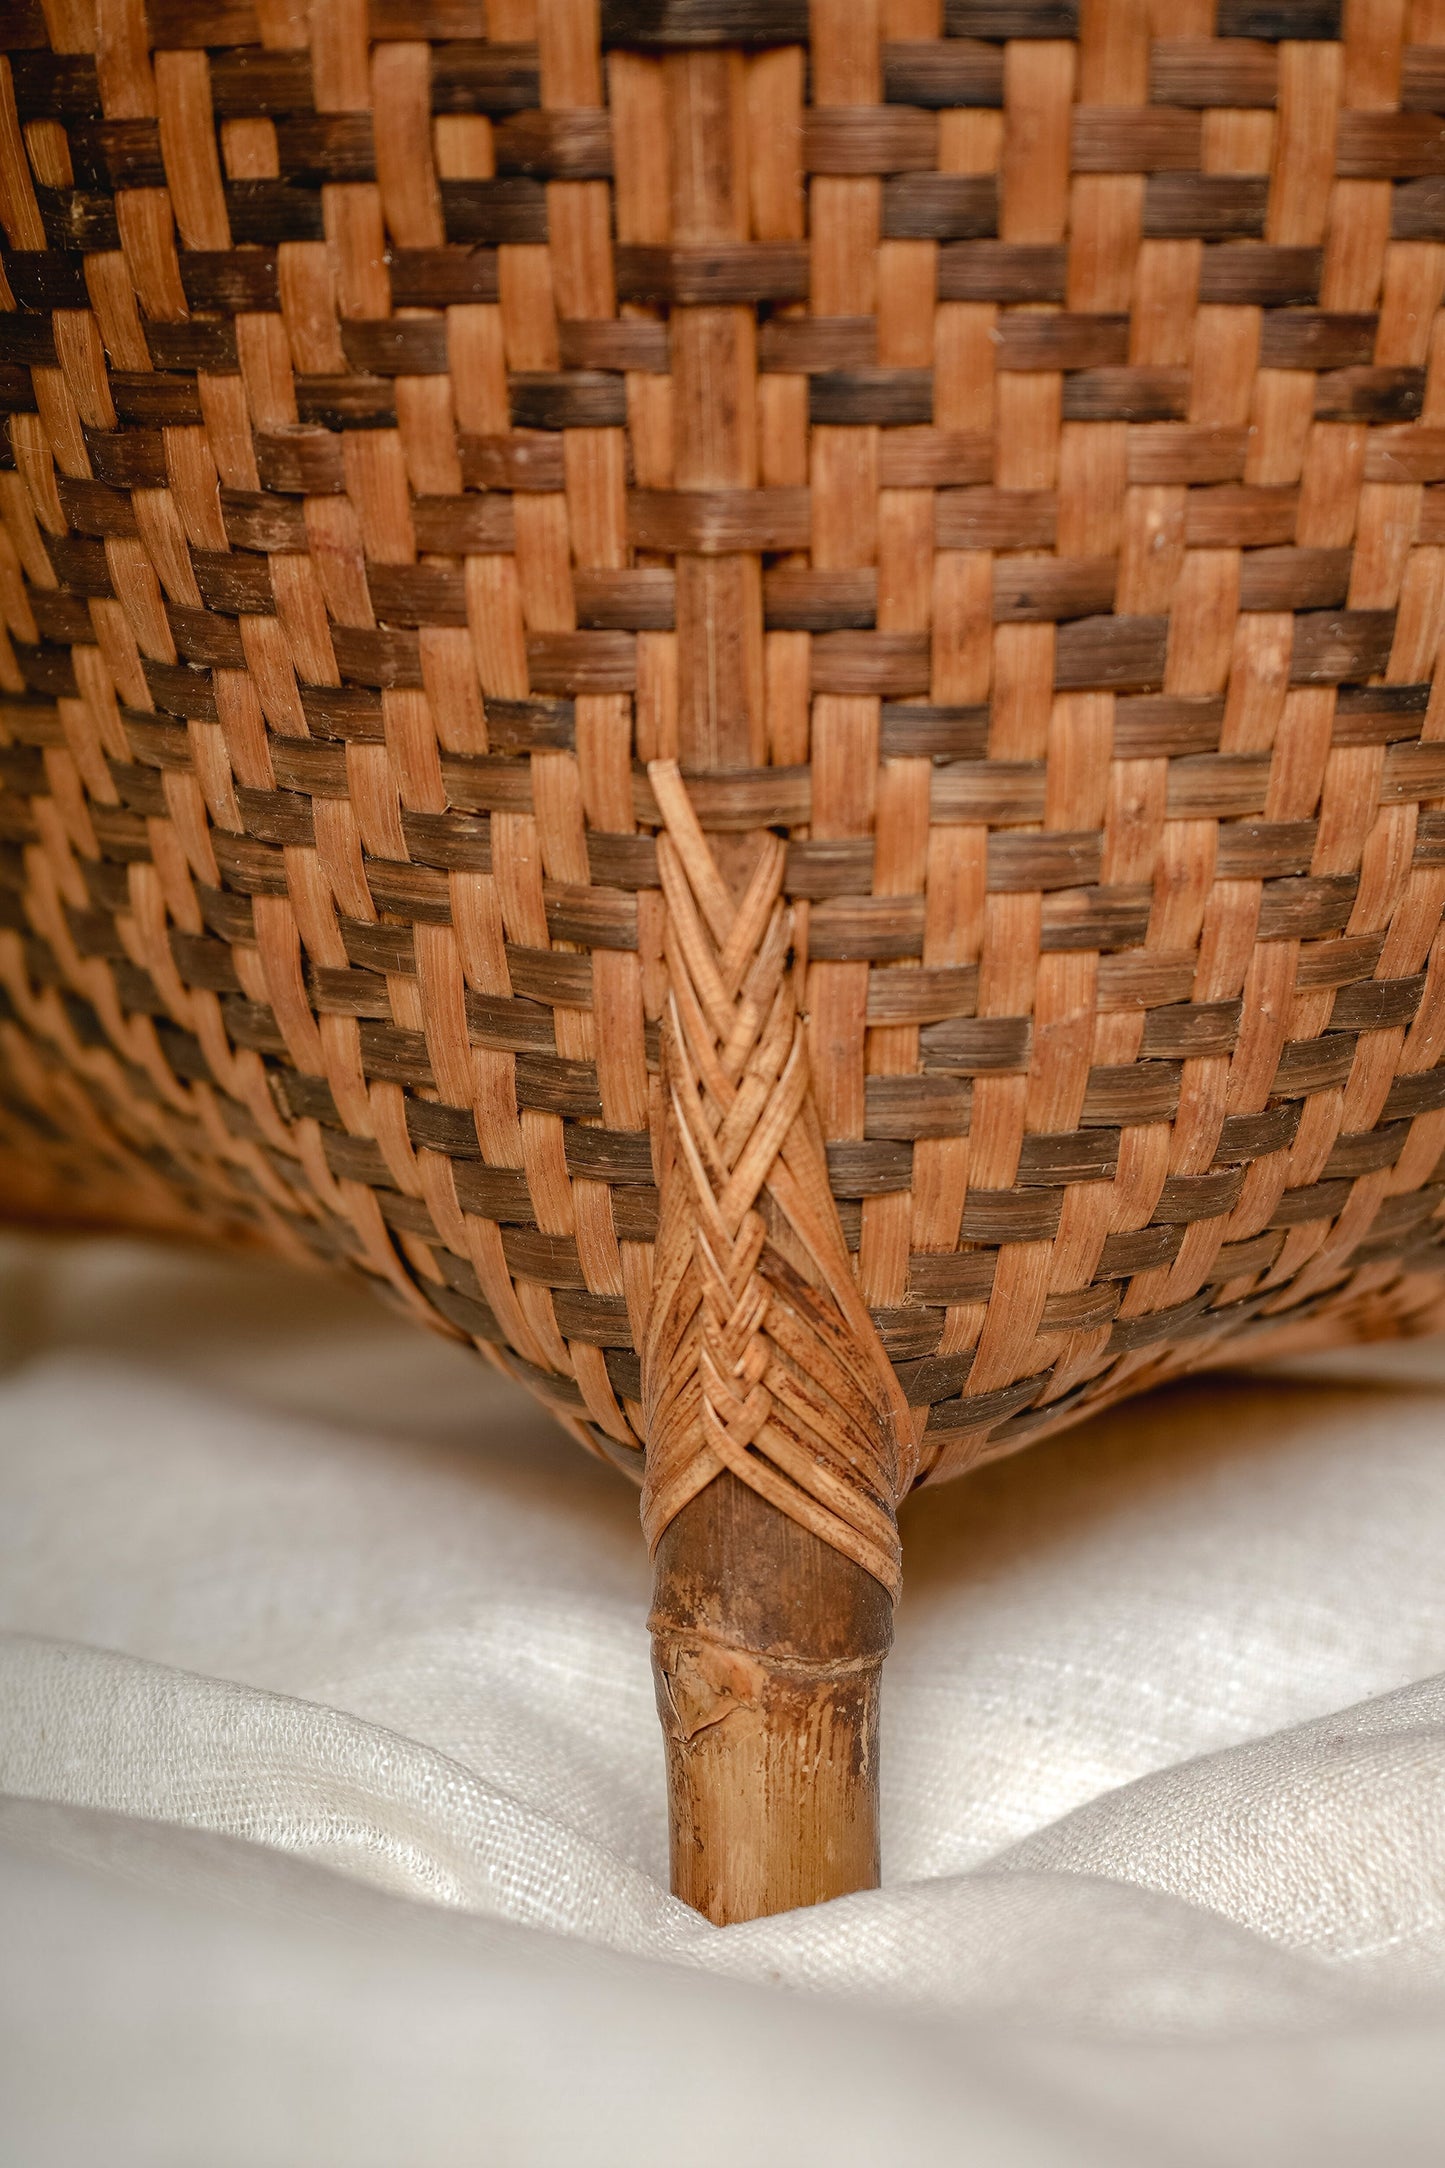 Natural Dyed Bamboo Heirloom Basket